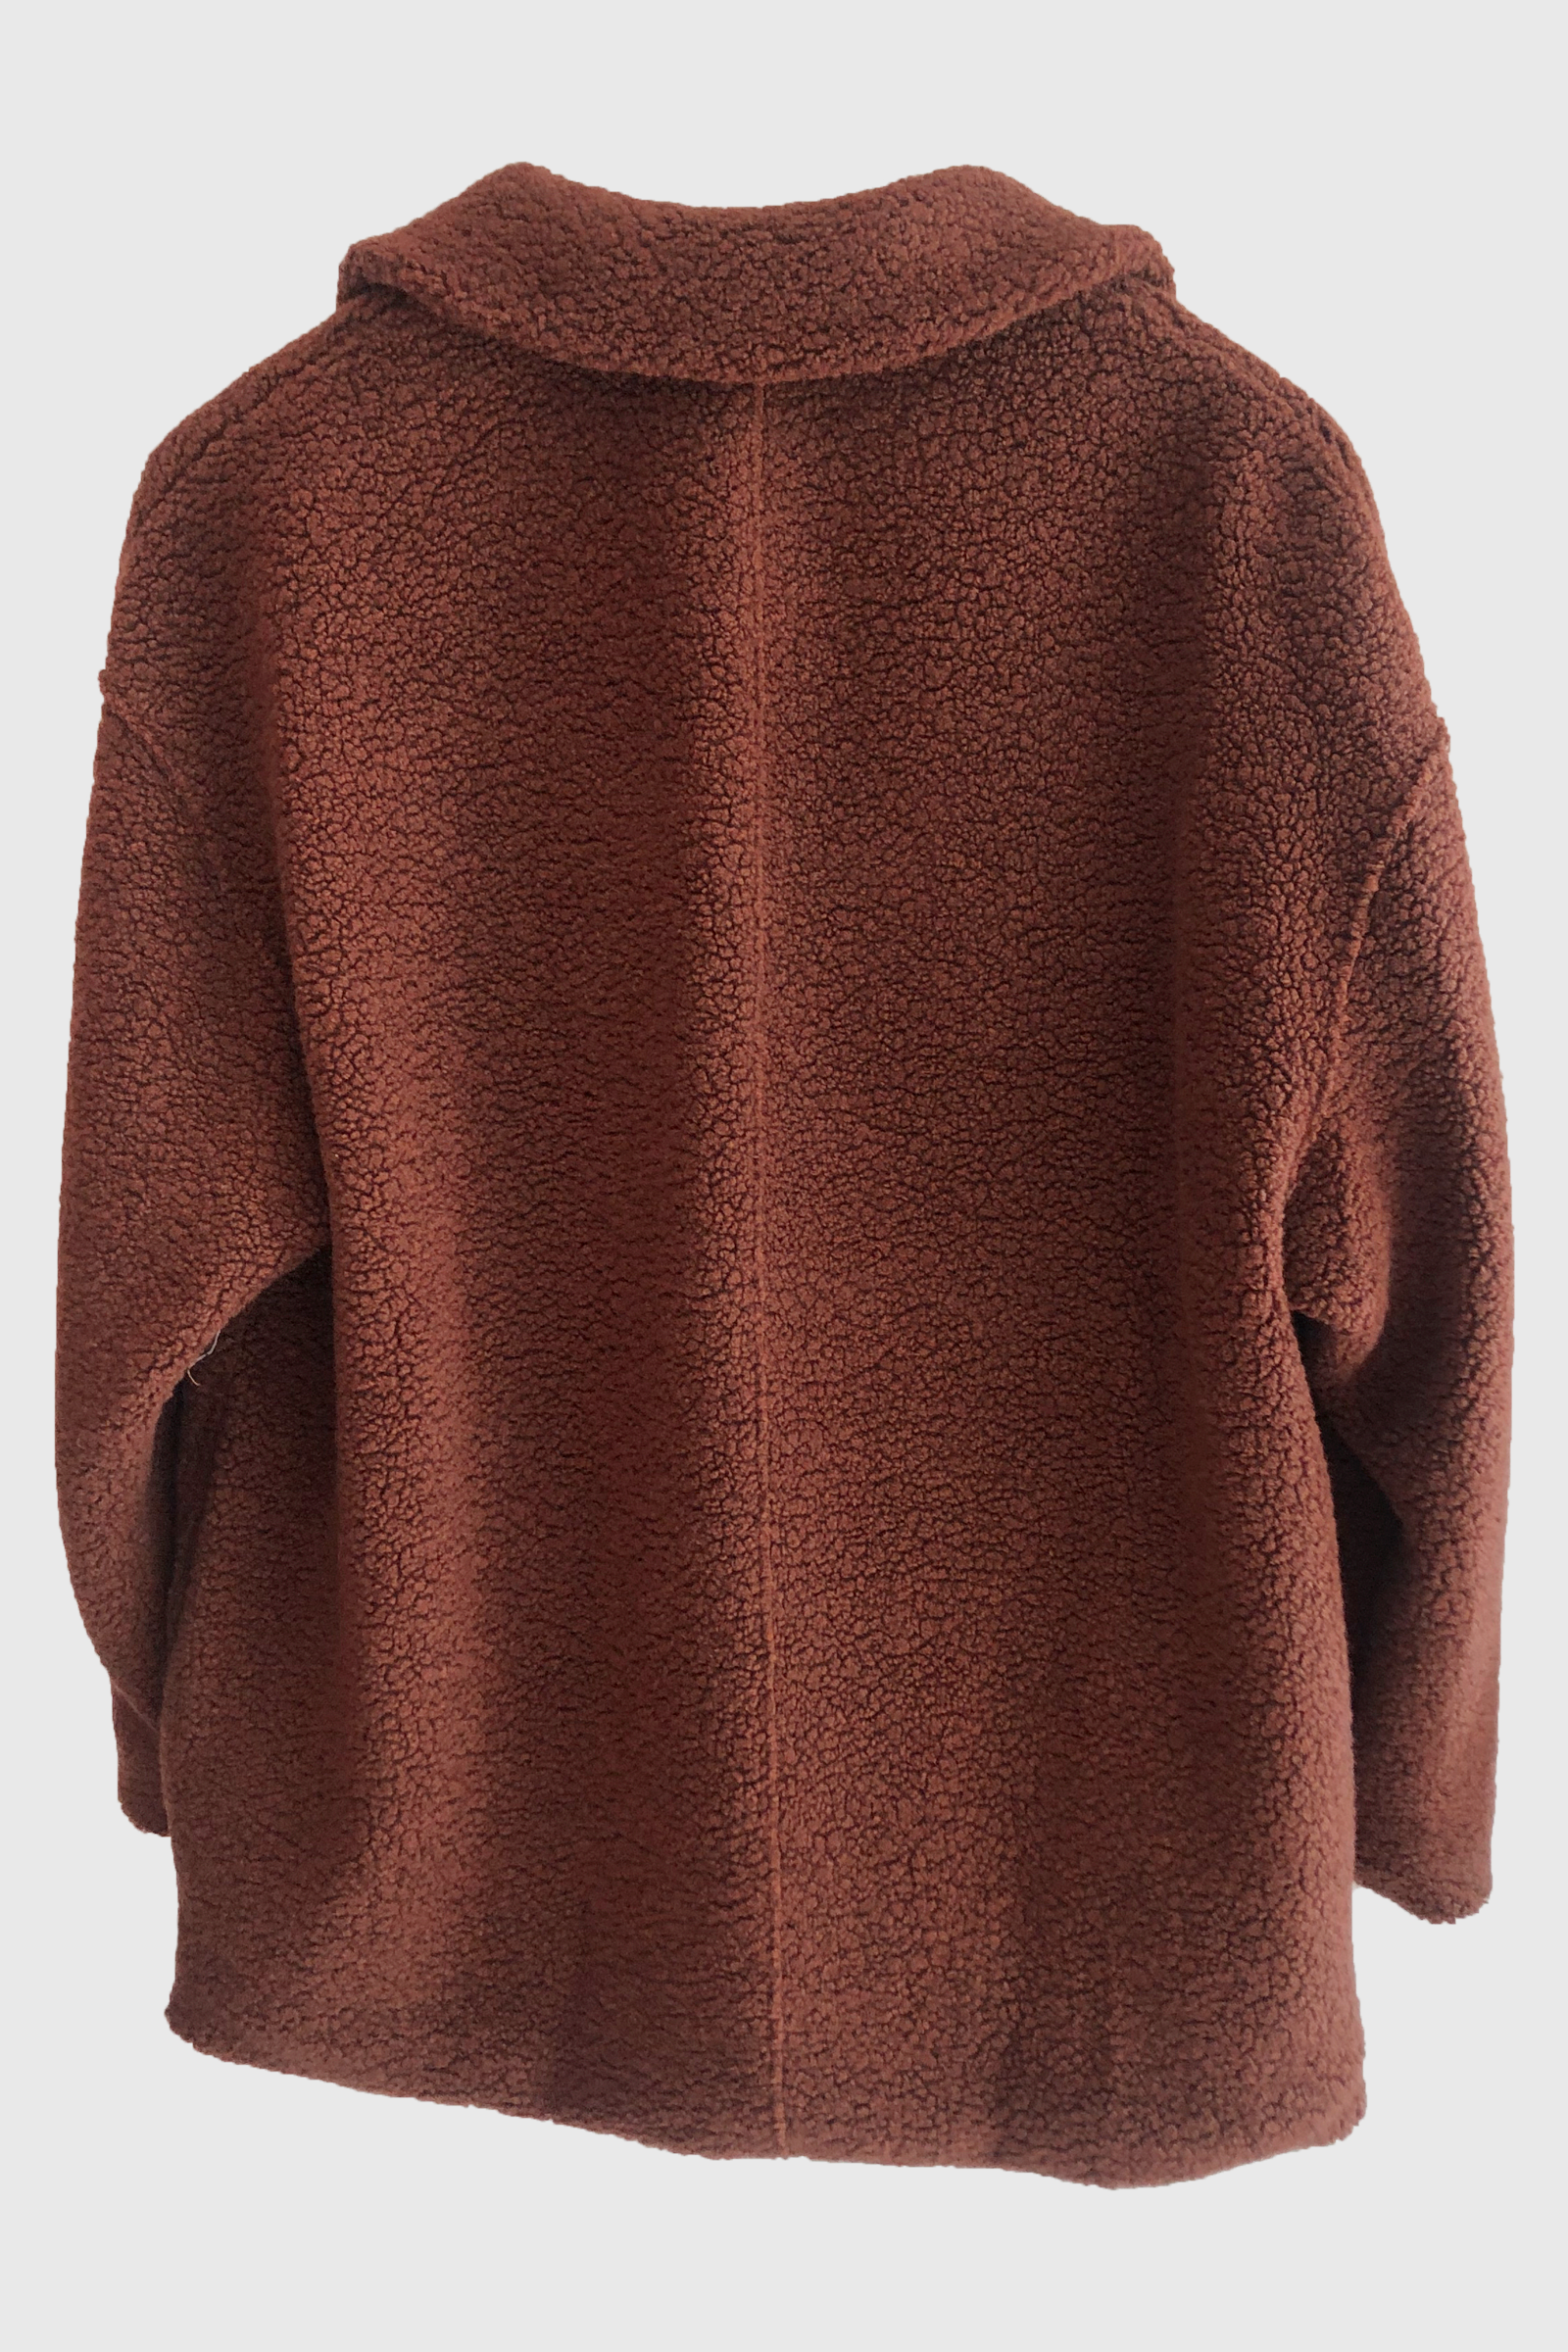 Harris Wharf Dropped Shoulder Boucle Jacket in Caramel